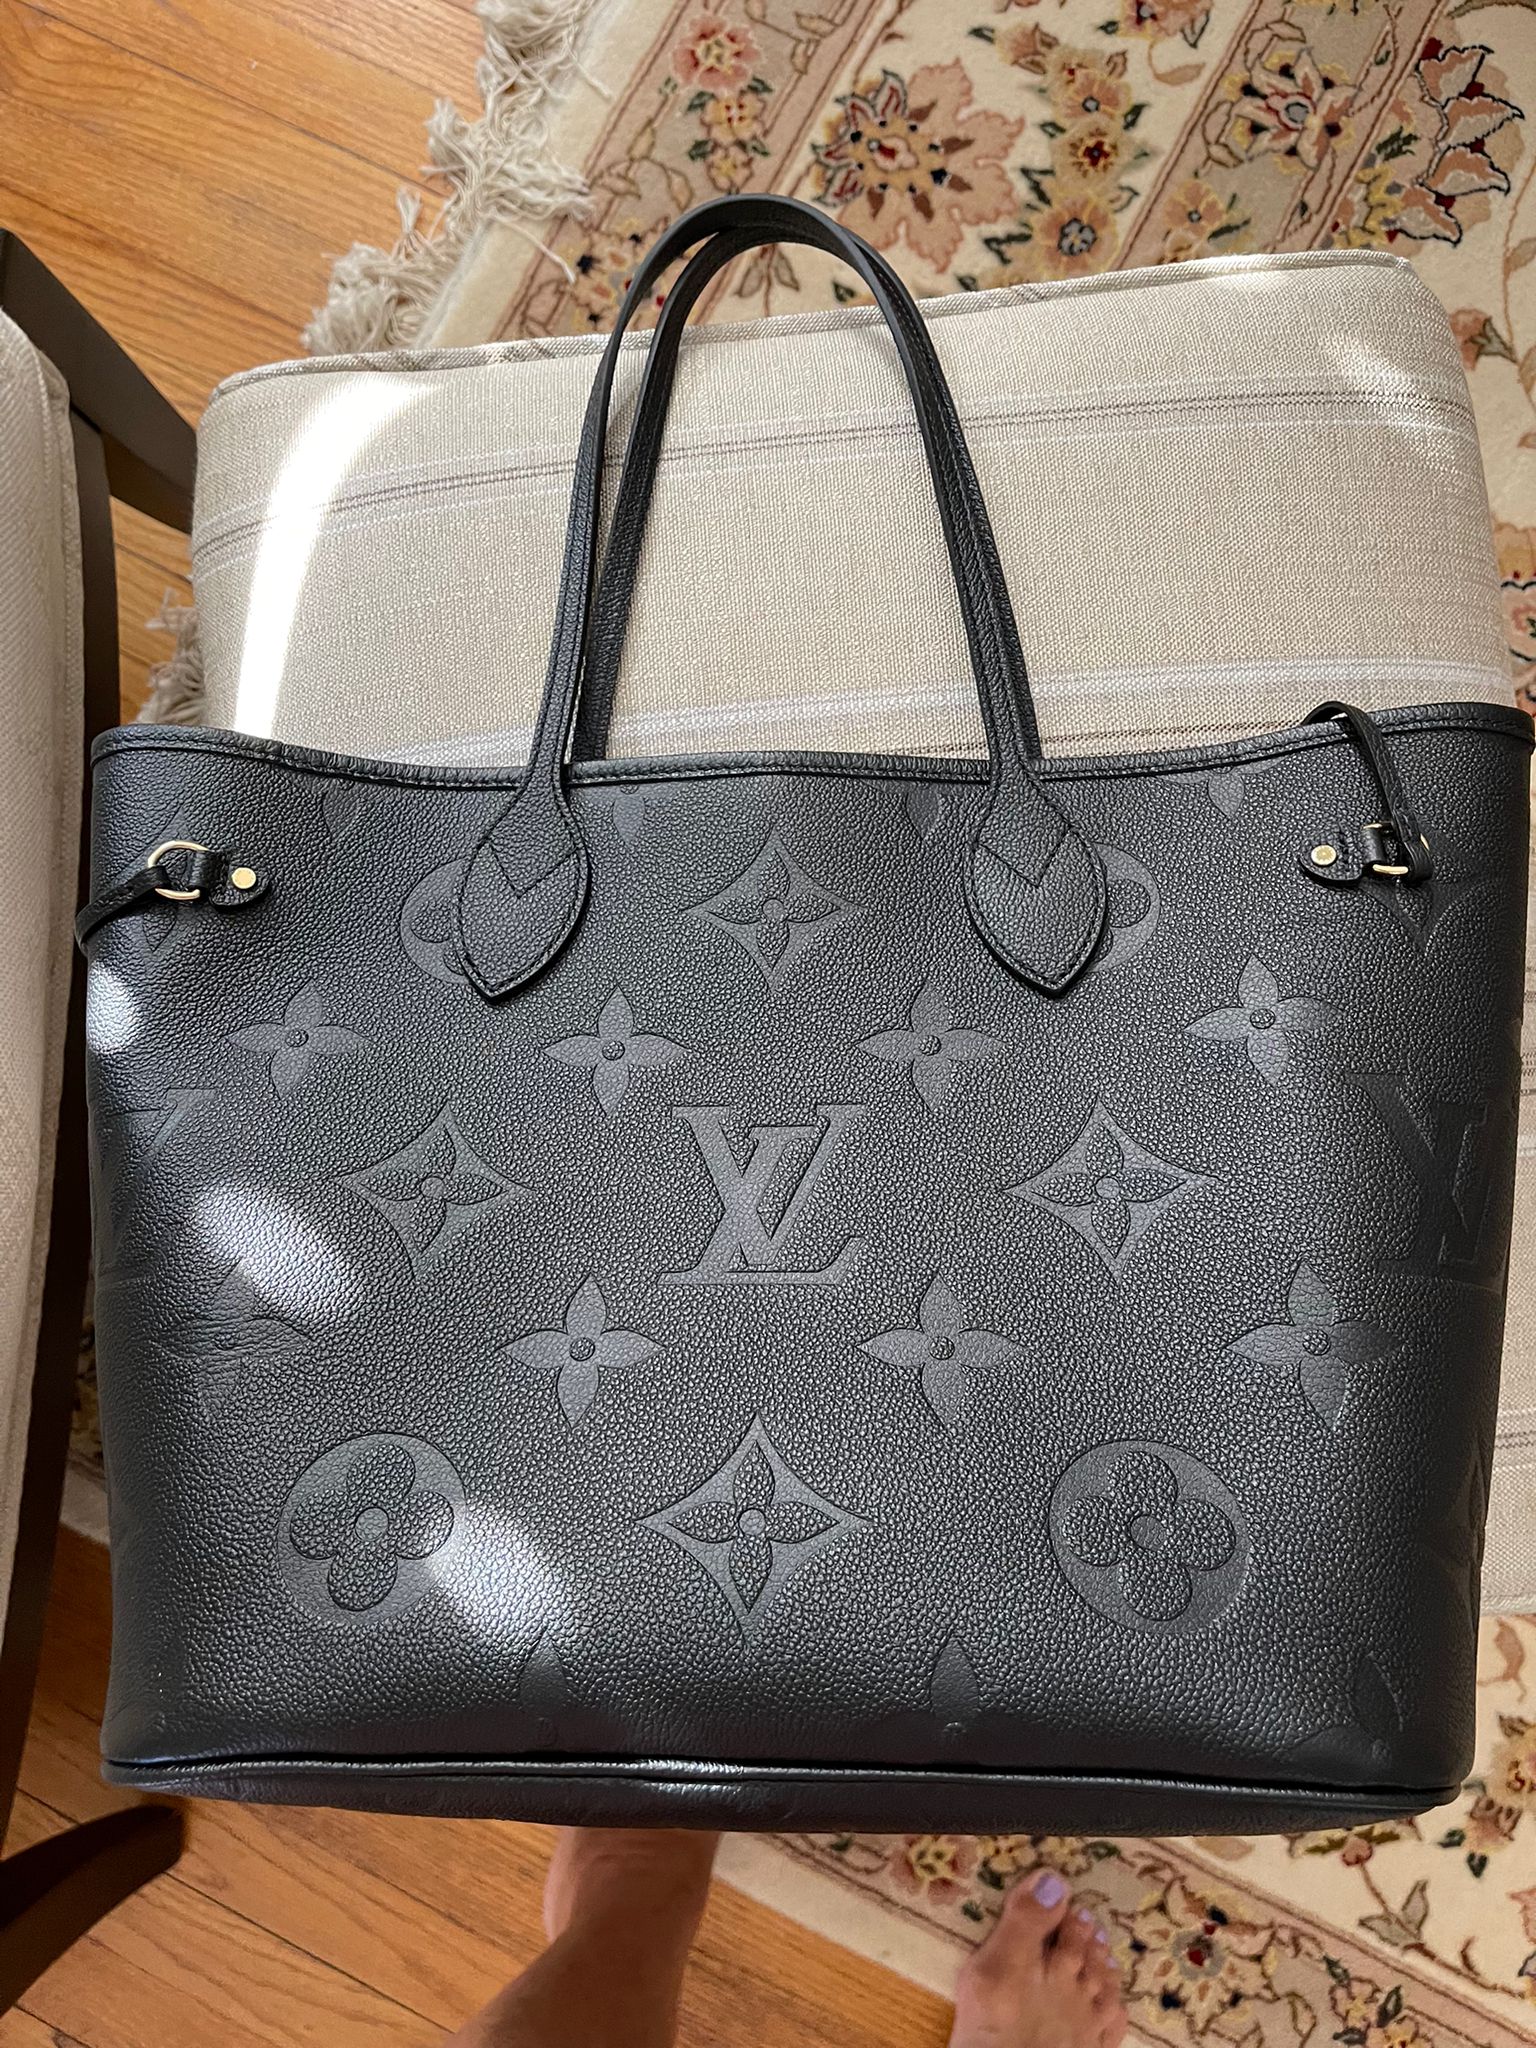 What do you think? Is this new Louis Vuitton tote too close to the Her